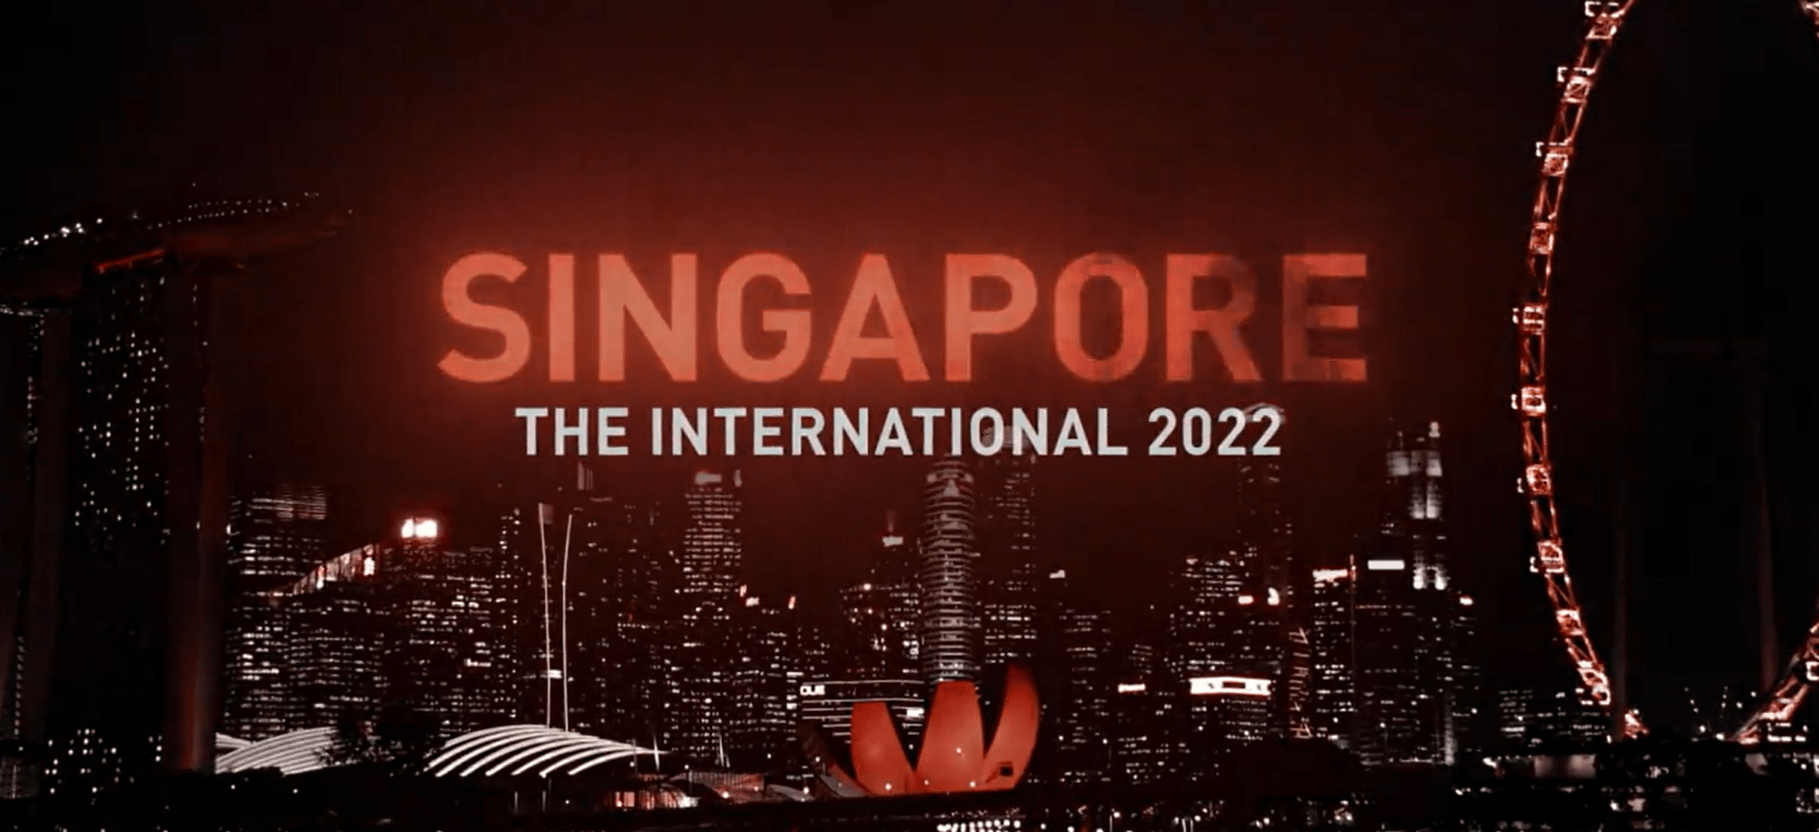 Tickets For The International 2022 Go On Sale Tomorrow And Here’s How You Can Get Them